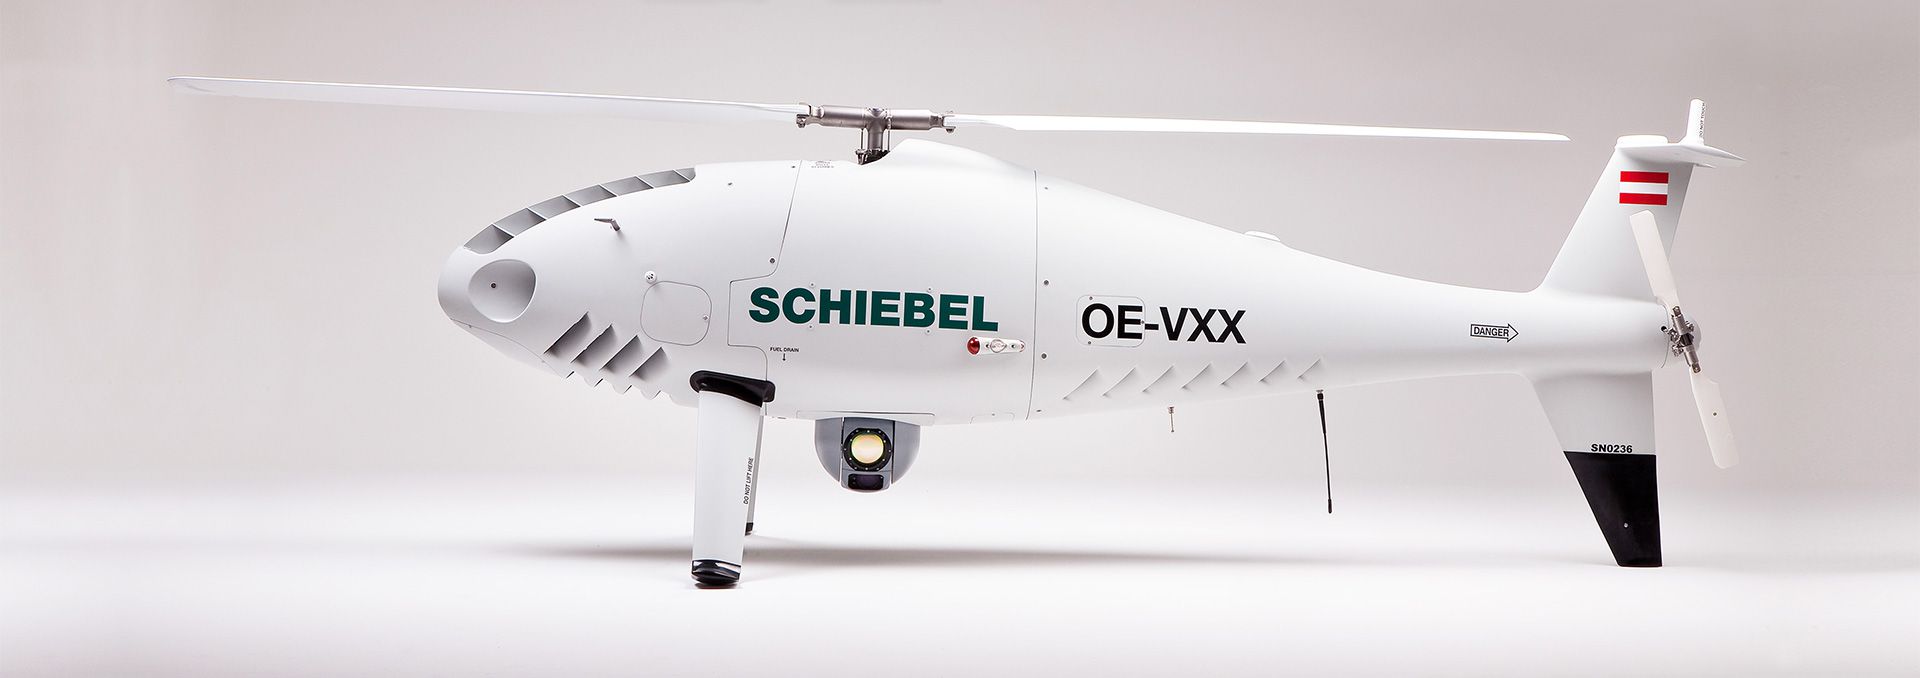 CAMCOPTER® S-100 System - Schiebel